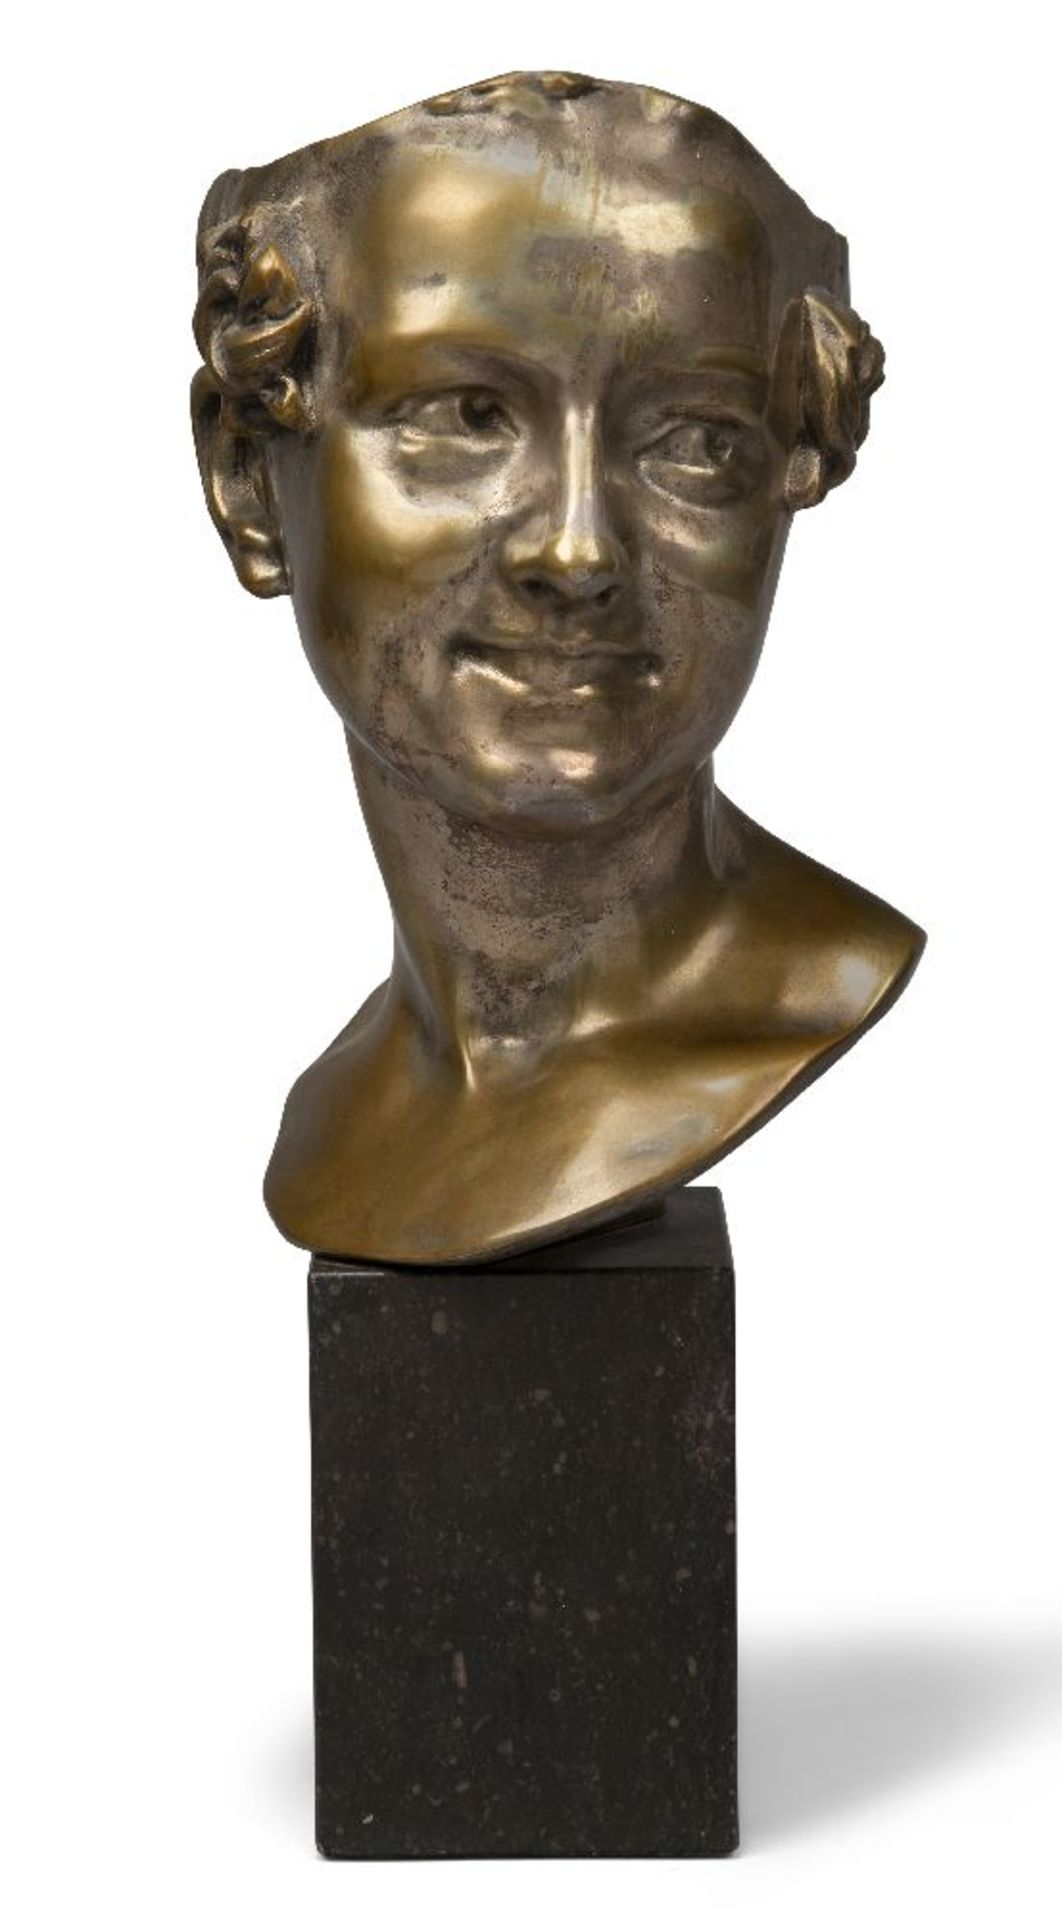 A French silvered bronze bust of a lady, early 20th century, unsigned, on a fossil black marble